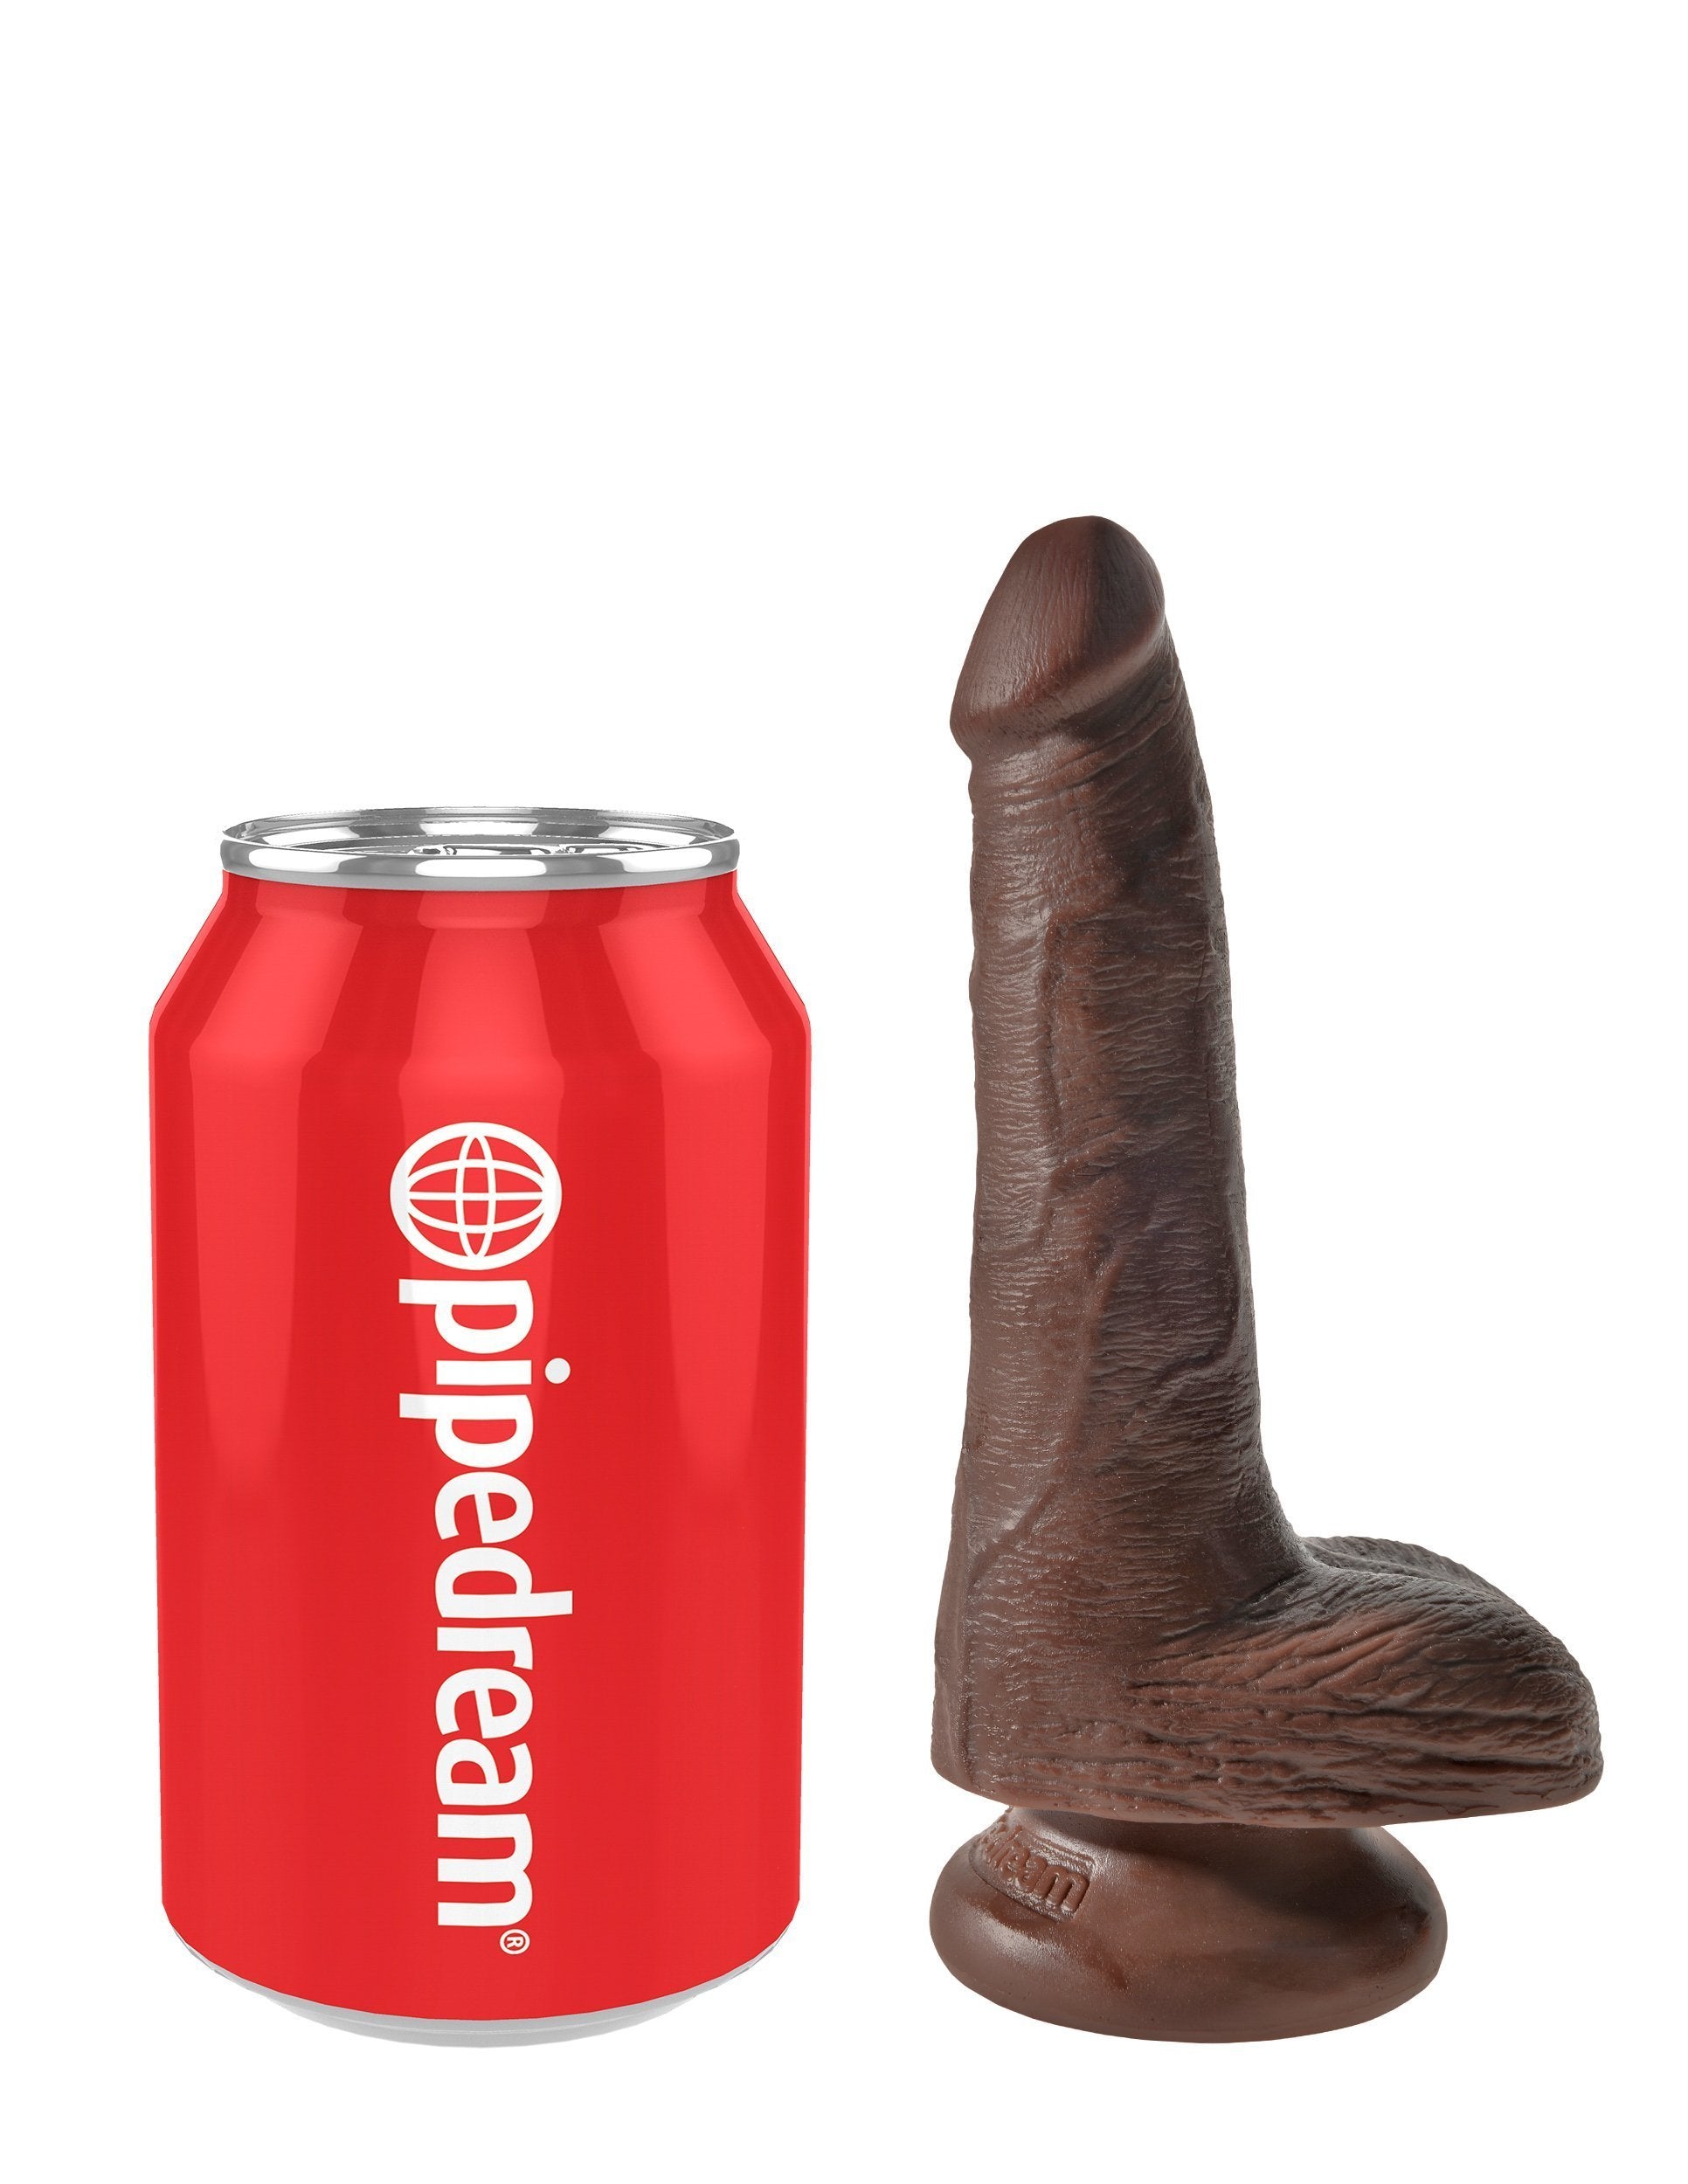 Pipedream - King Cock 6" Cock with Balls (Dark Brown) Realistic Dildo with suction cup (Non Vibration) Singapore